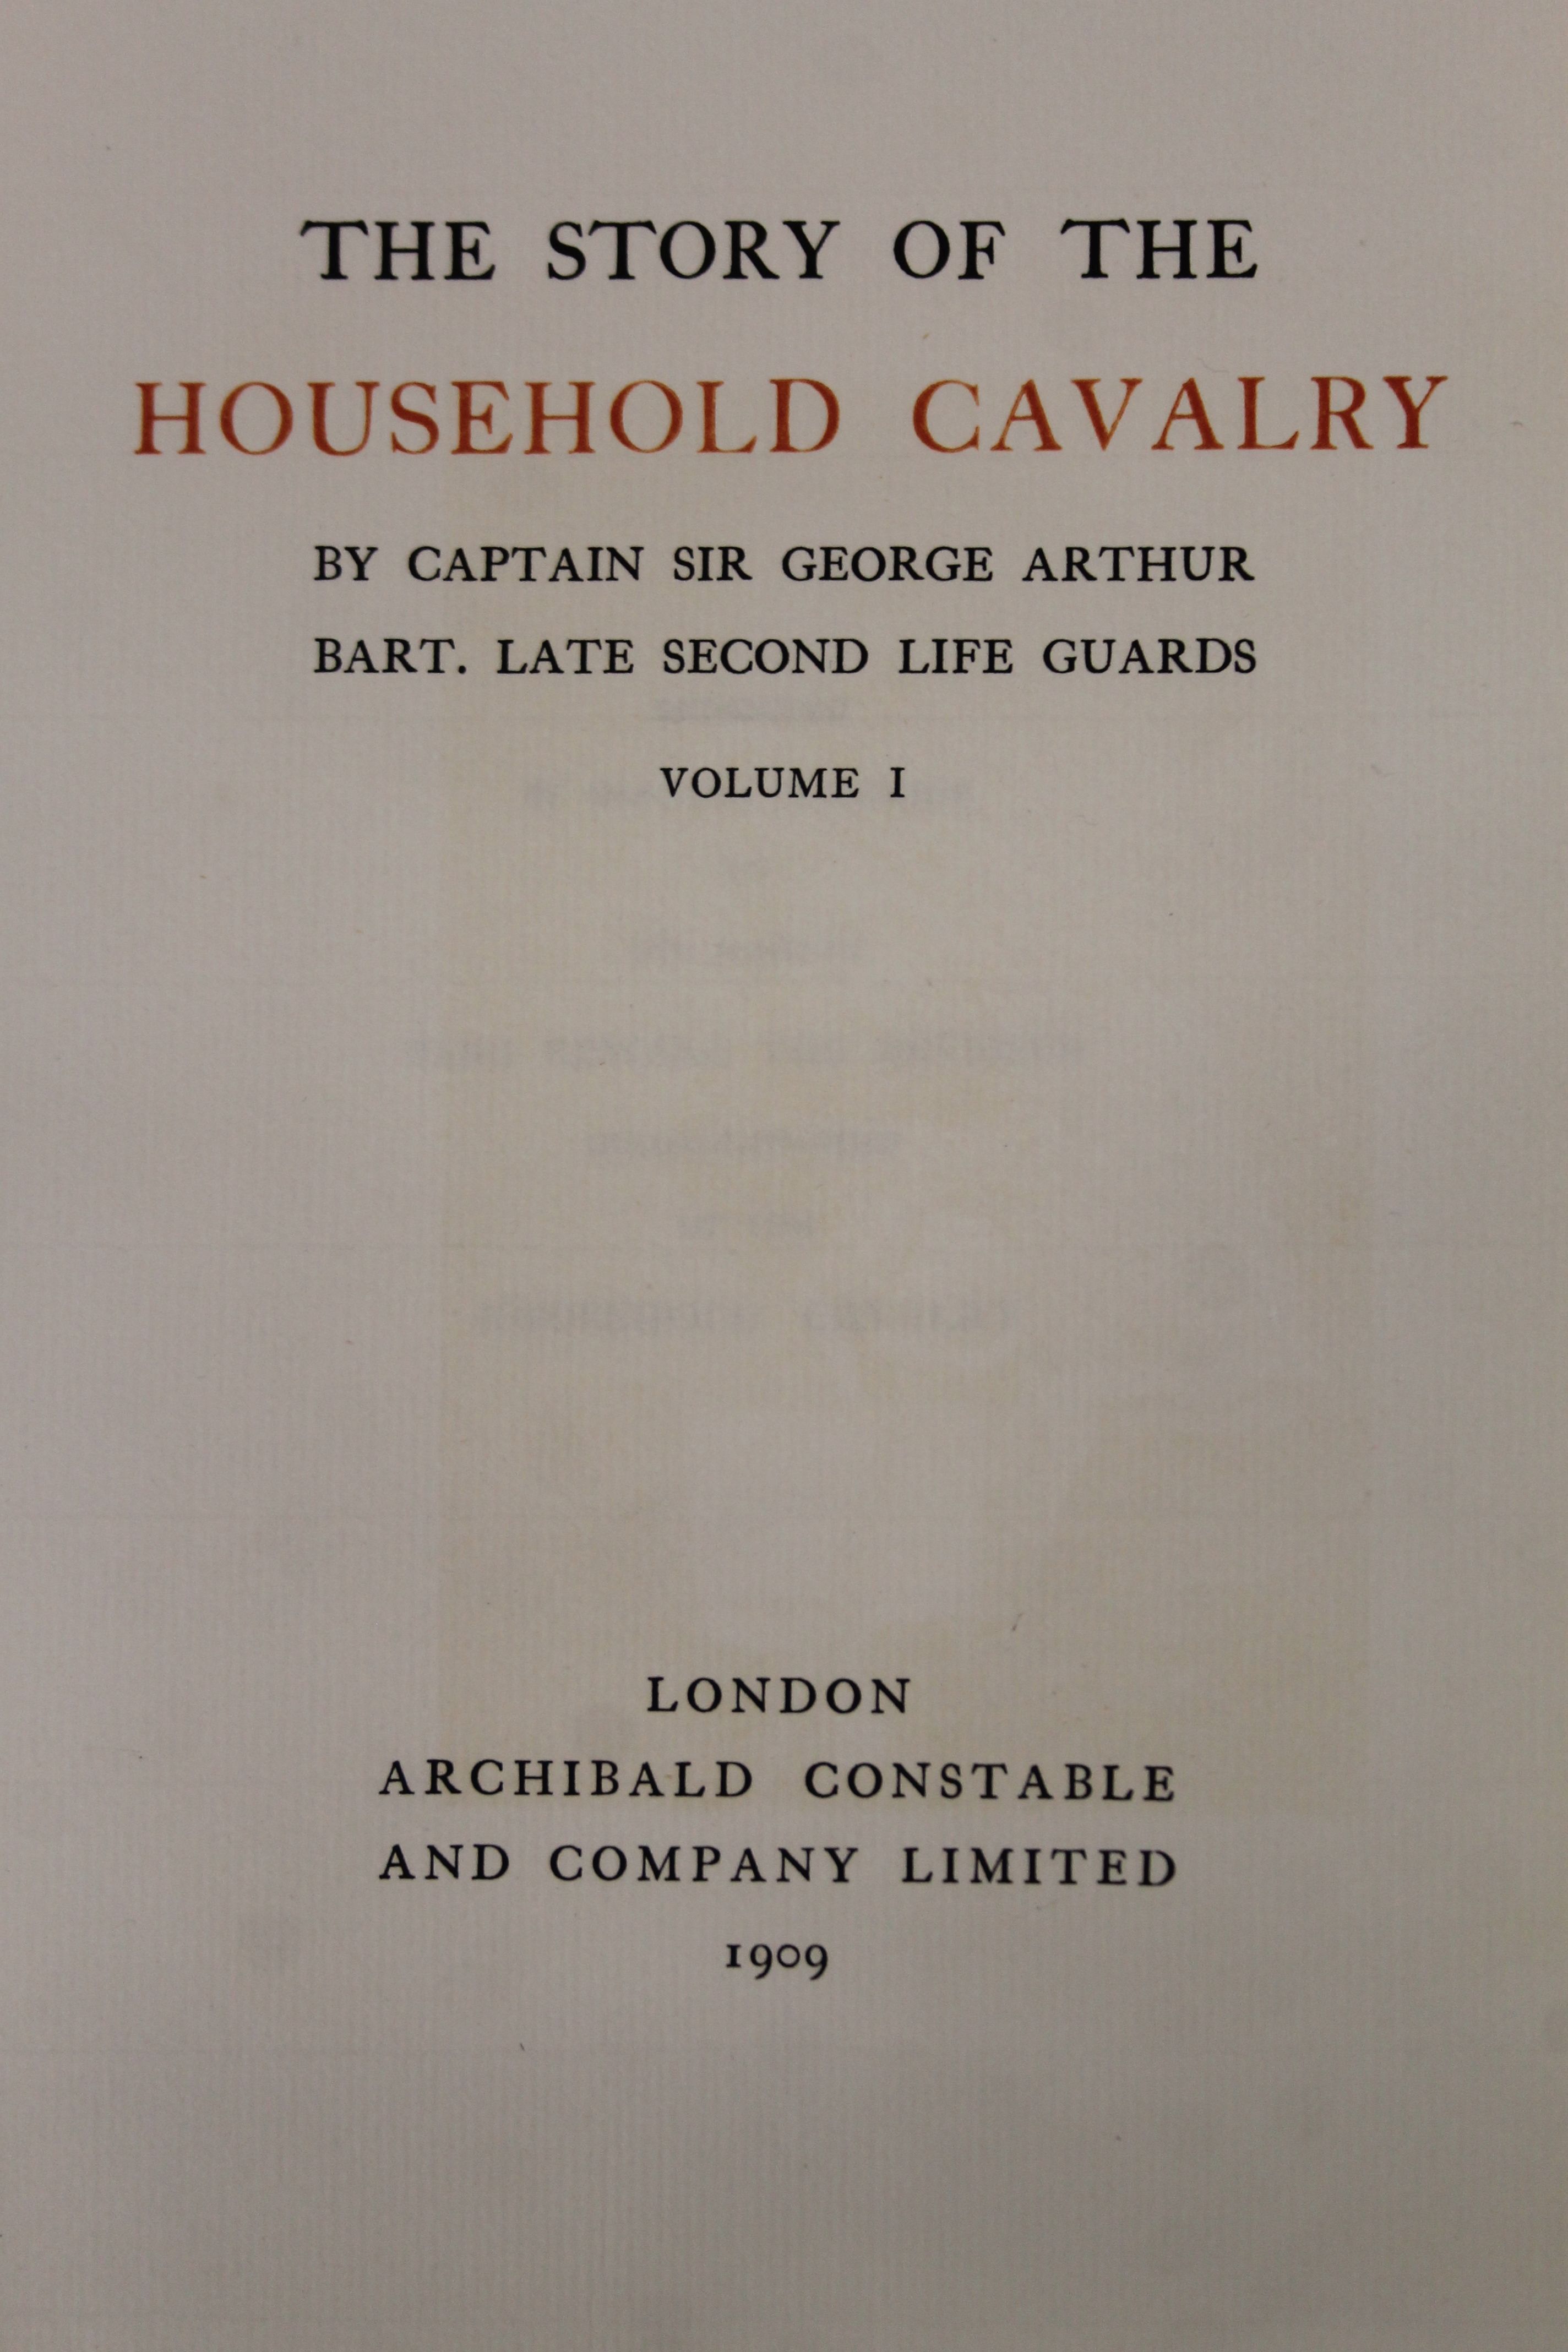 Arthur (Captain Sir George), The Story of the Household Cavalry, - Image 6 of 7